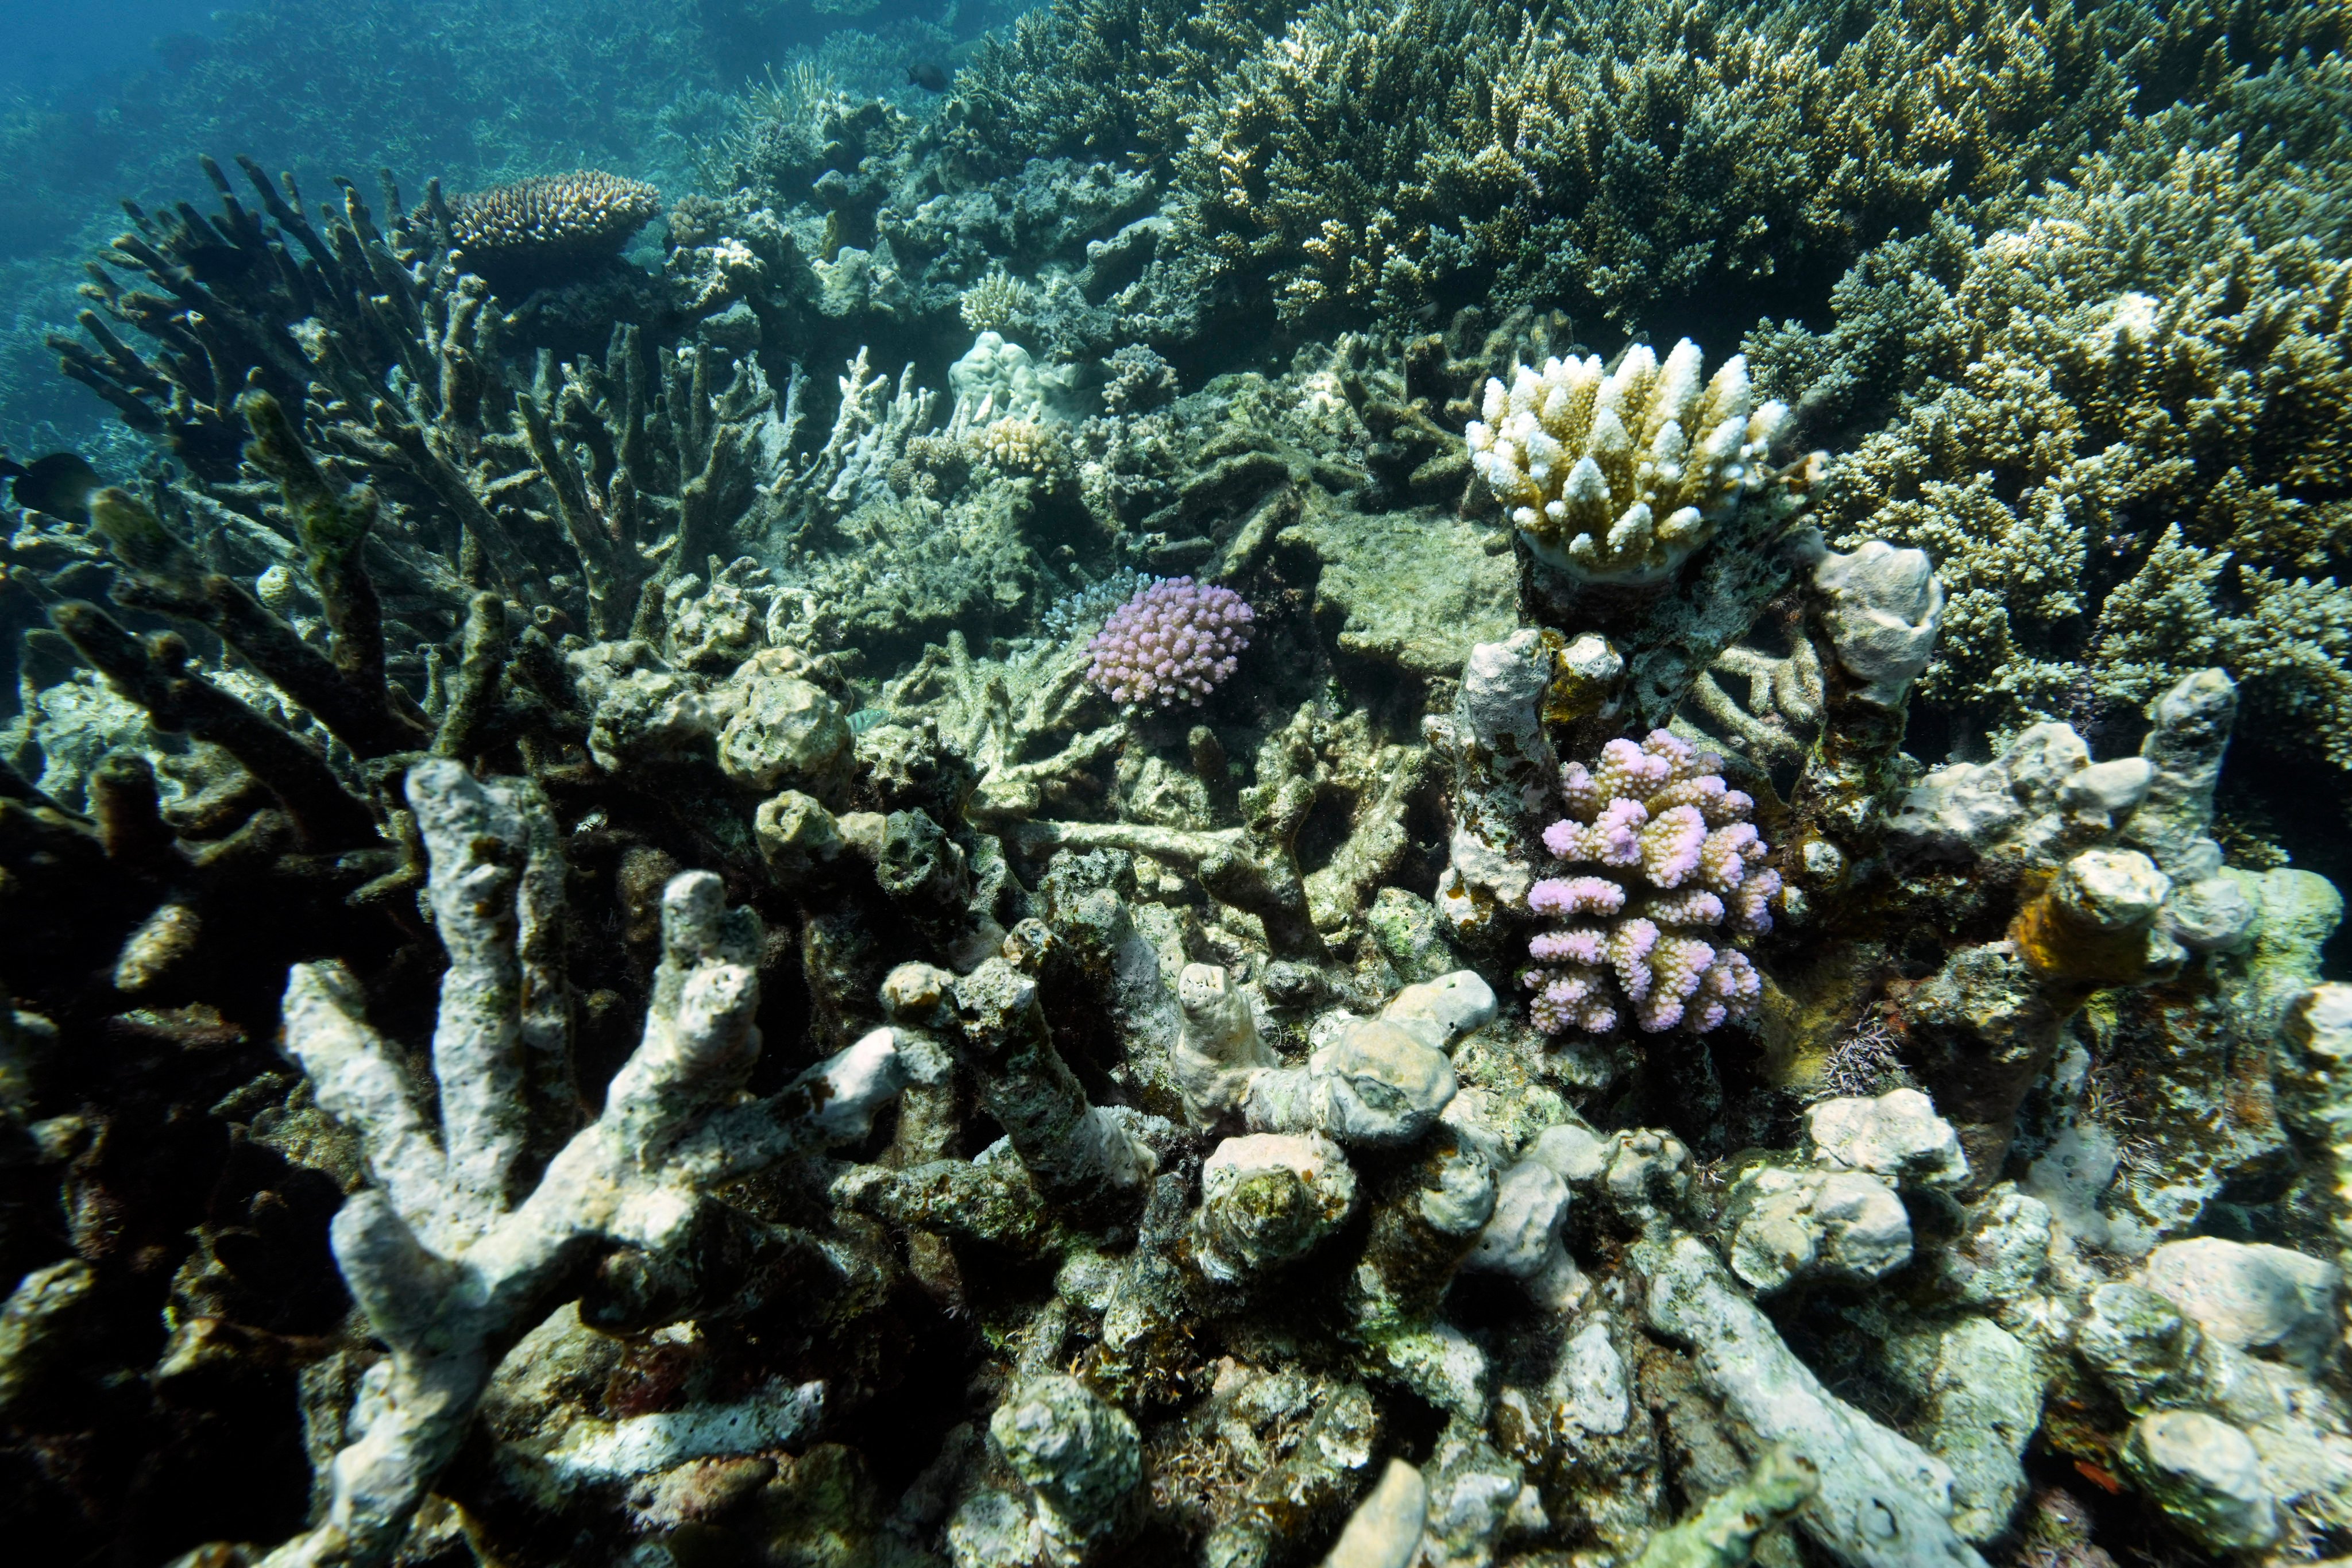 Coral on Moore Reef is visible in the Gunggandji Sea Country off the coast of Queensland, Australia. The UN body that regulates the world’s ocean floor could open the international seabed for mining, including for materials vital for the green transition. Conservationists worry that ecosystems will be damaged. Photo: AP